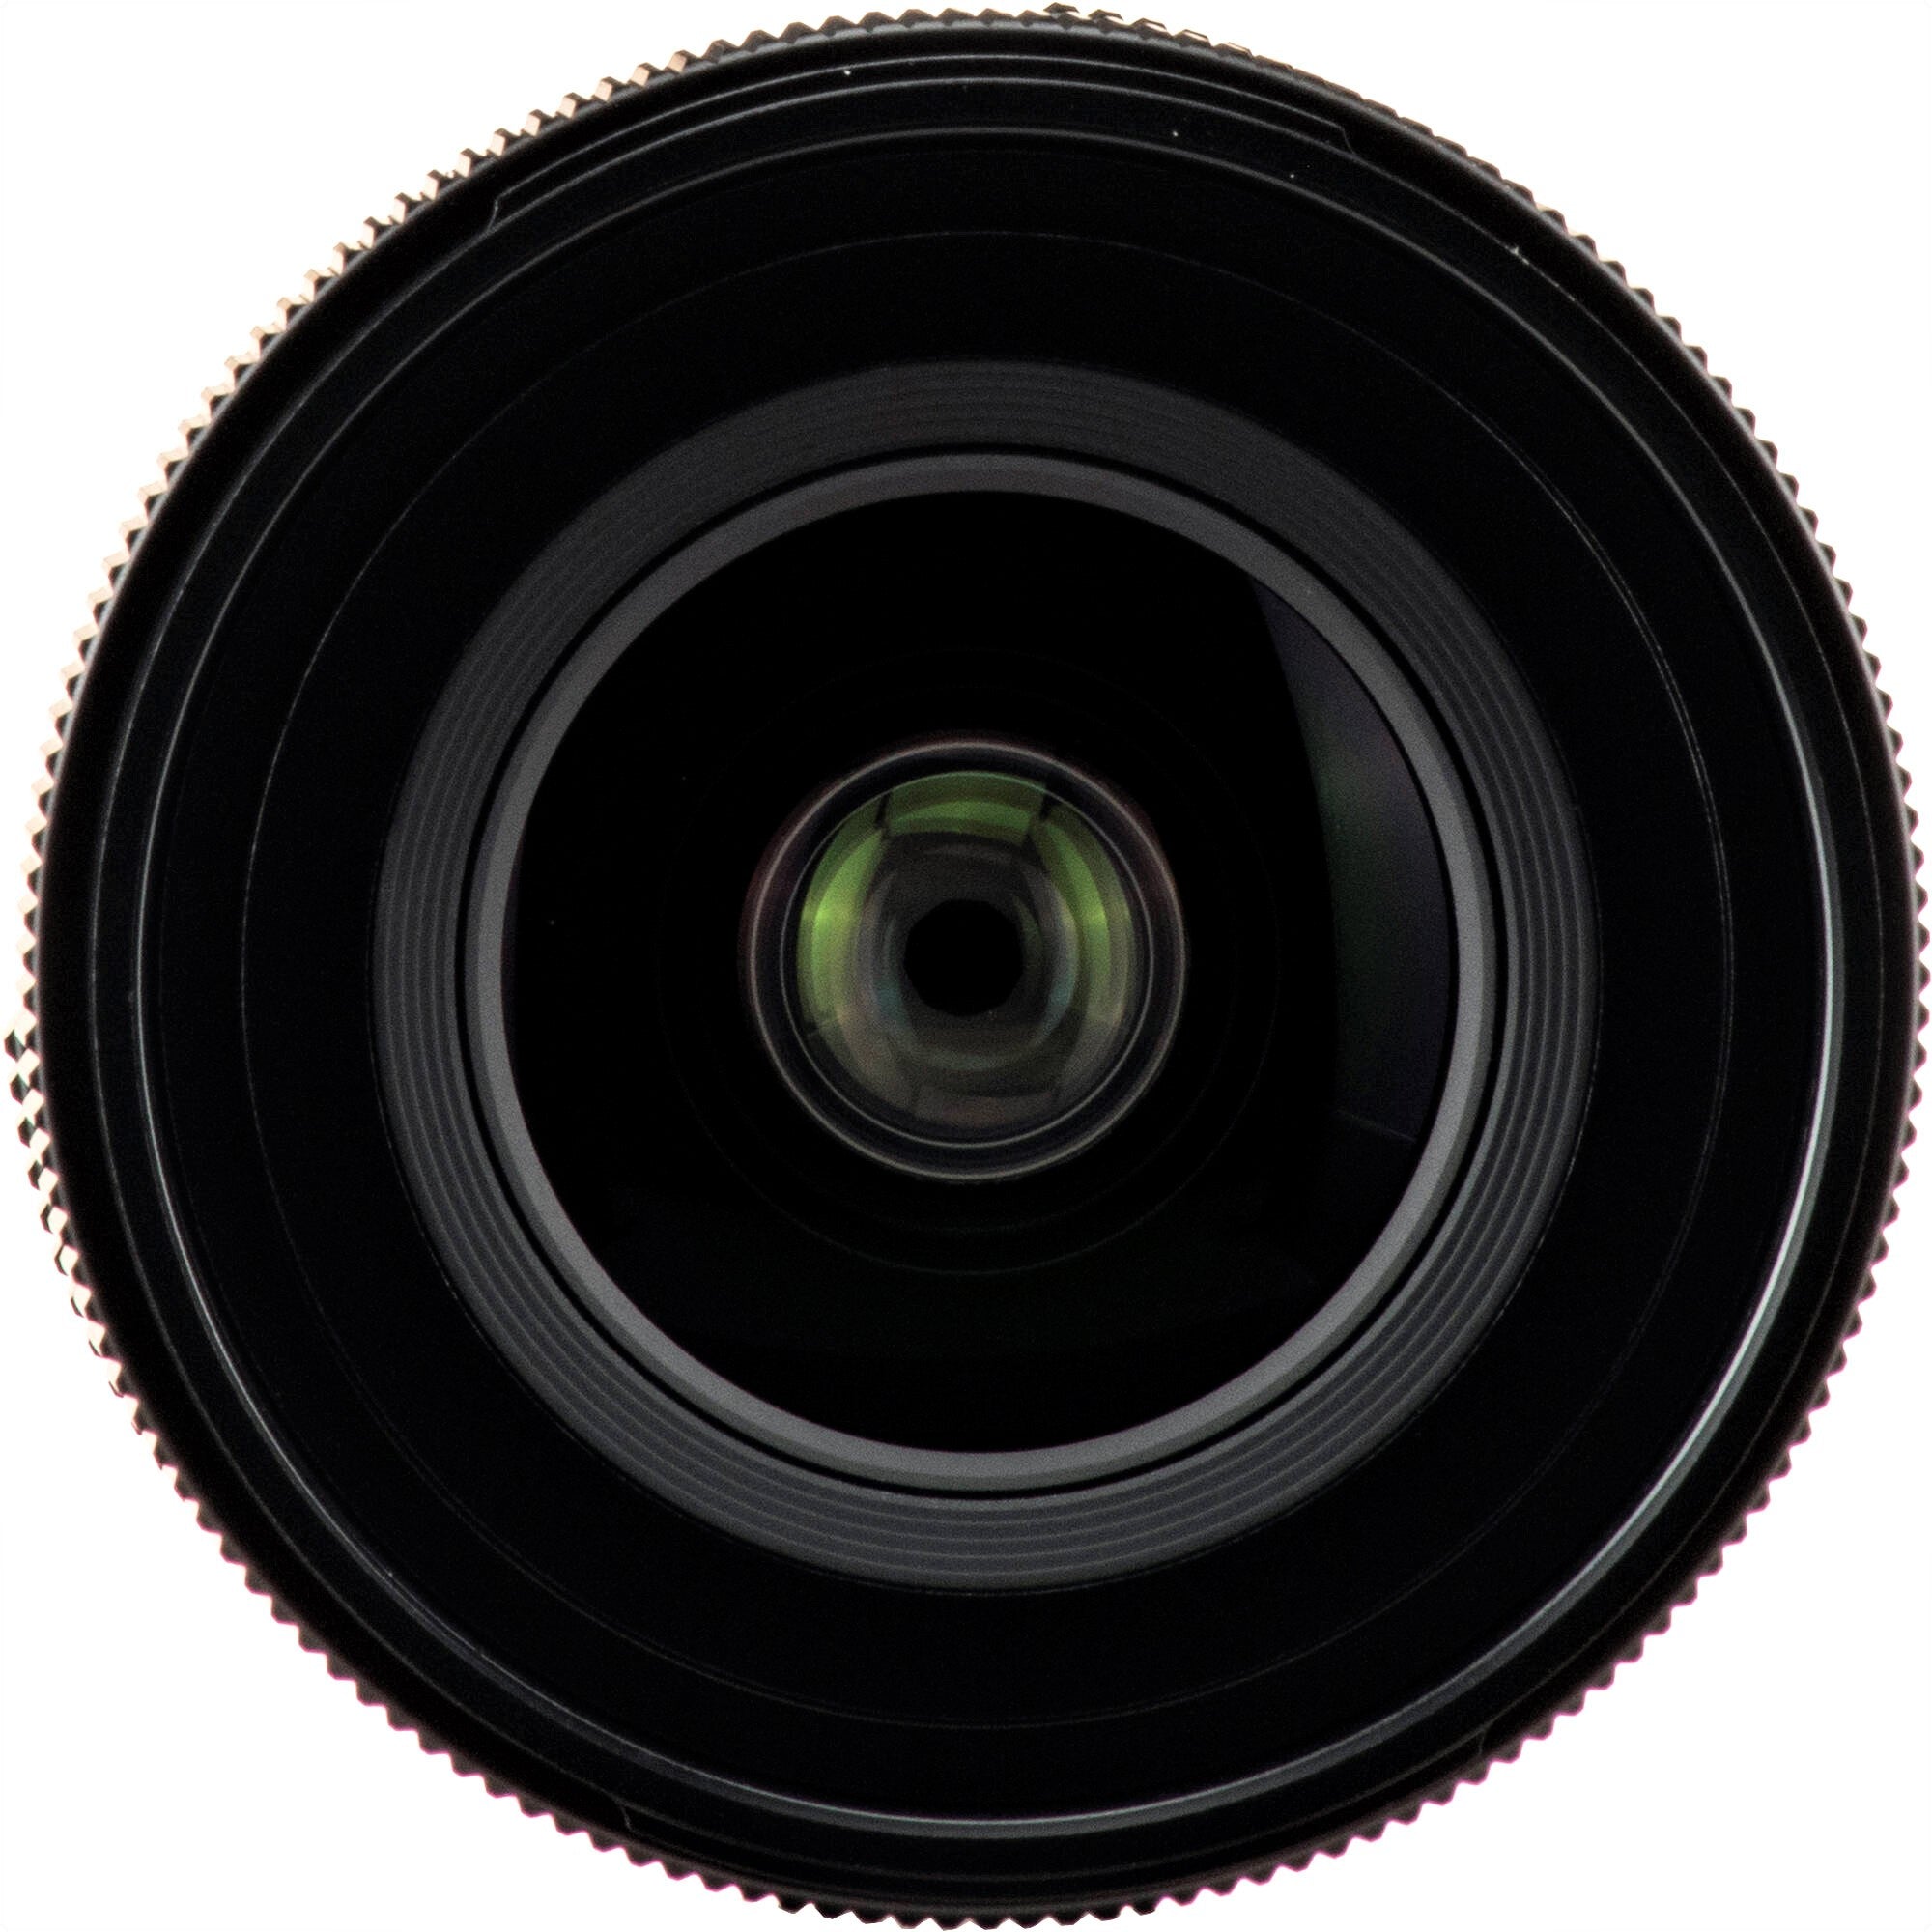 Sigma 24mm F2.0 DG DN Contemporary Lens (Leica L Mount) in a Front Close-Up View